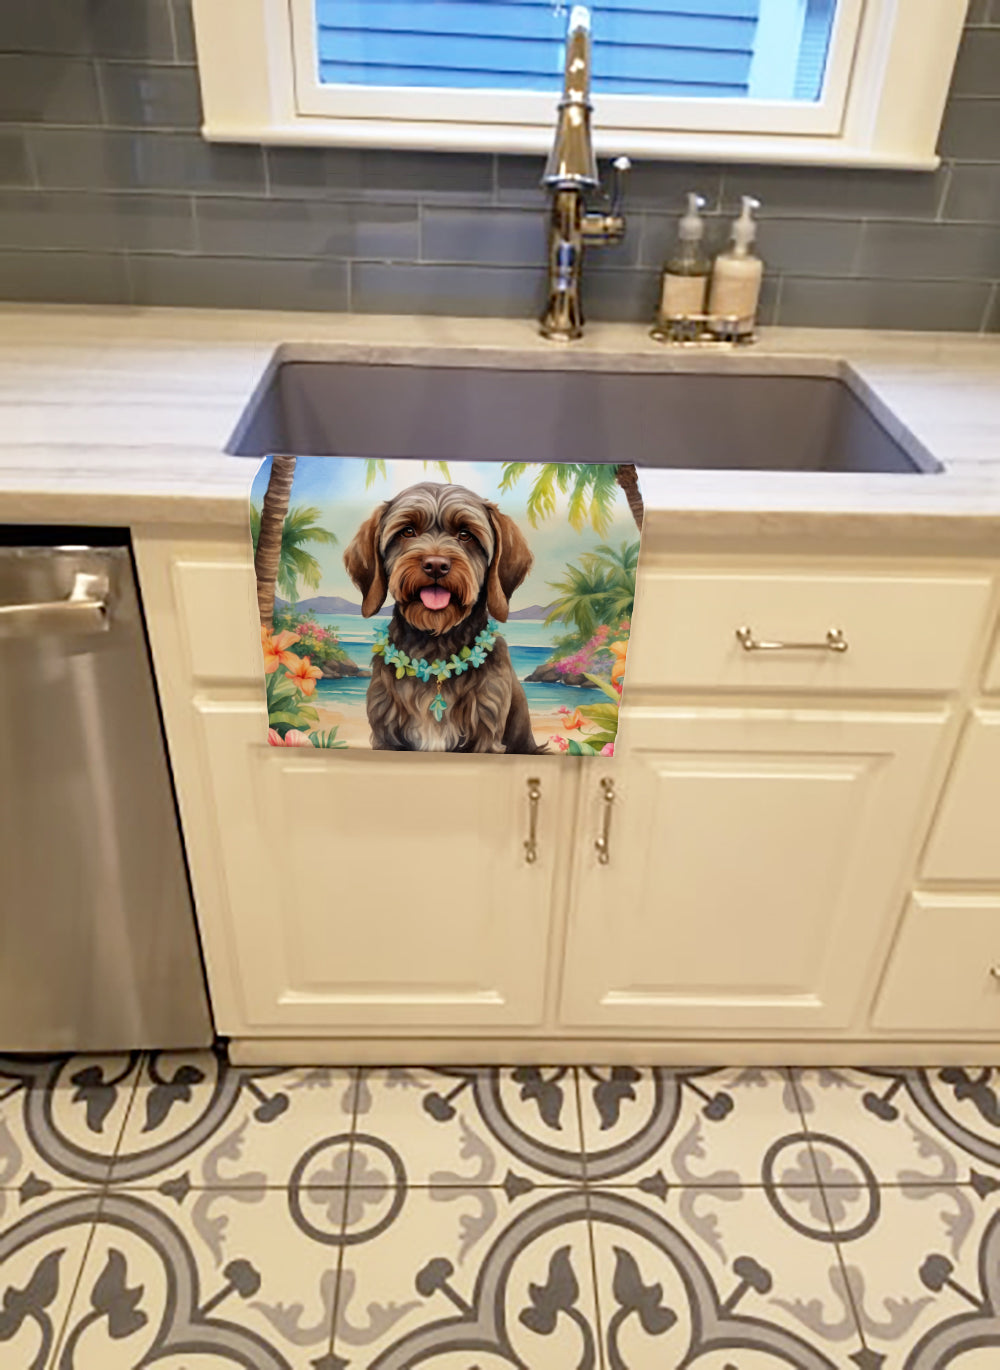 Buy this Wirehaired Pointing Griffon Luau Kitchen Towel